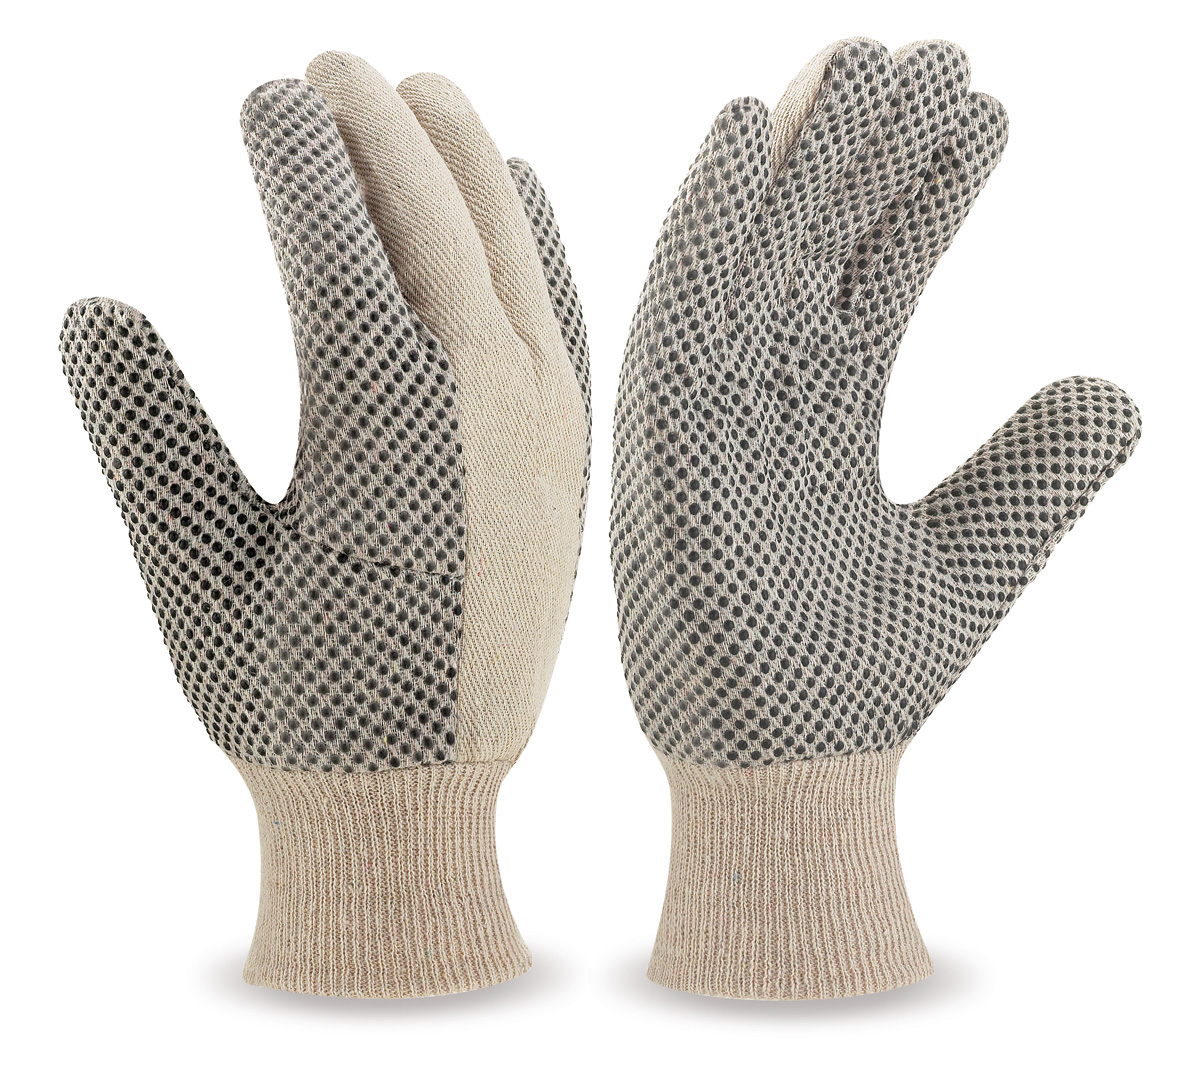 688-G Work Gloves Cotton Cotton canvas gloves with PVC points on the palm and fingertips